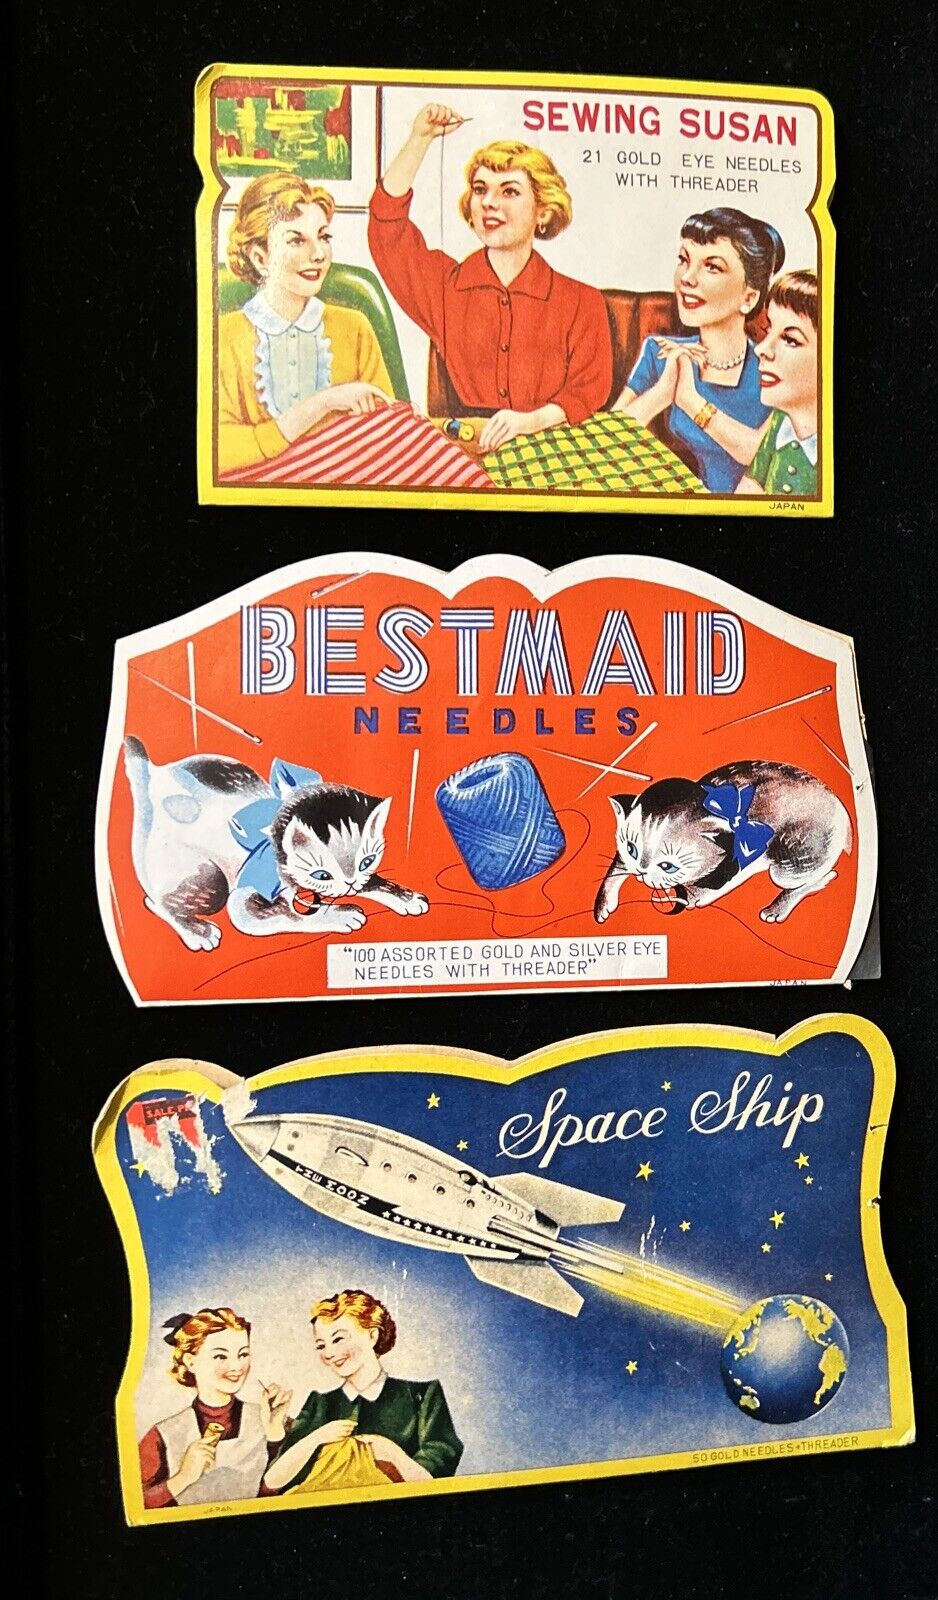 Set of 3 Vtg Sewing Needle Kits Space Ship Kitten Bestmaid Sewing Susan